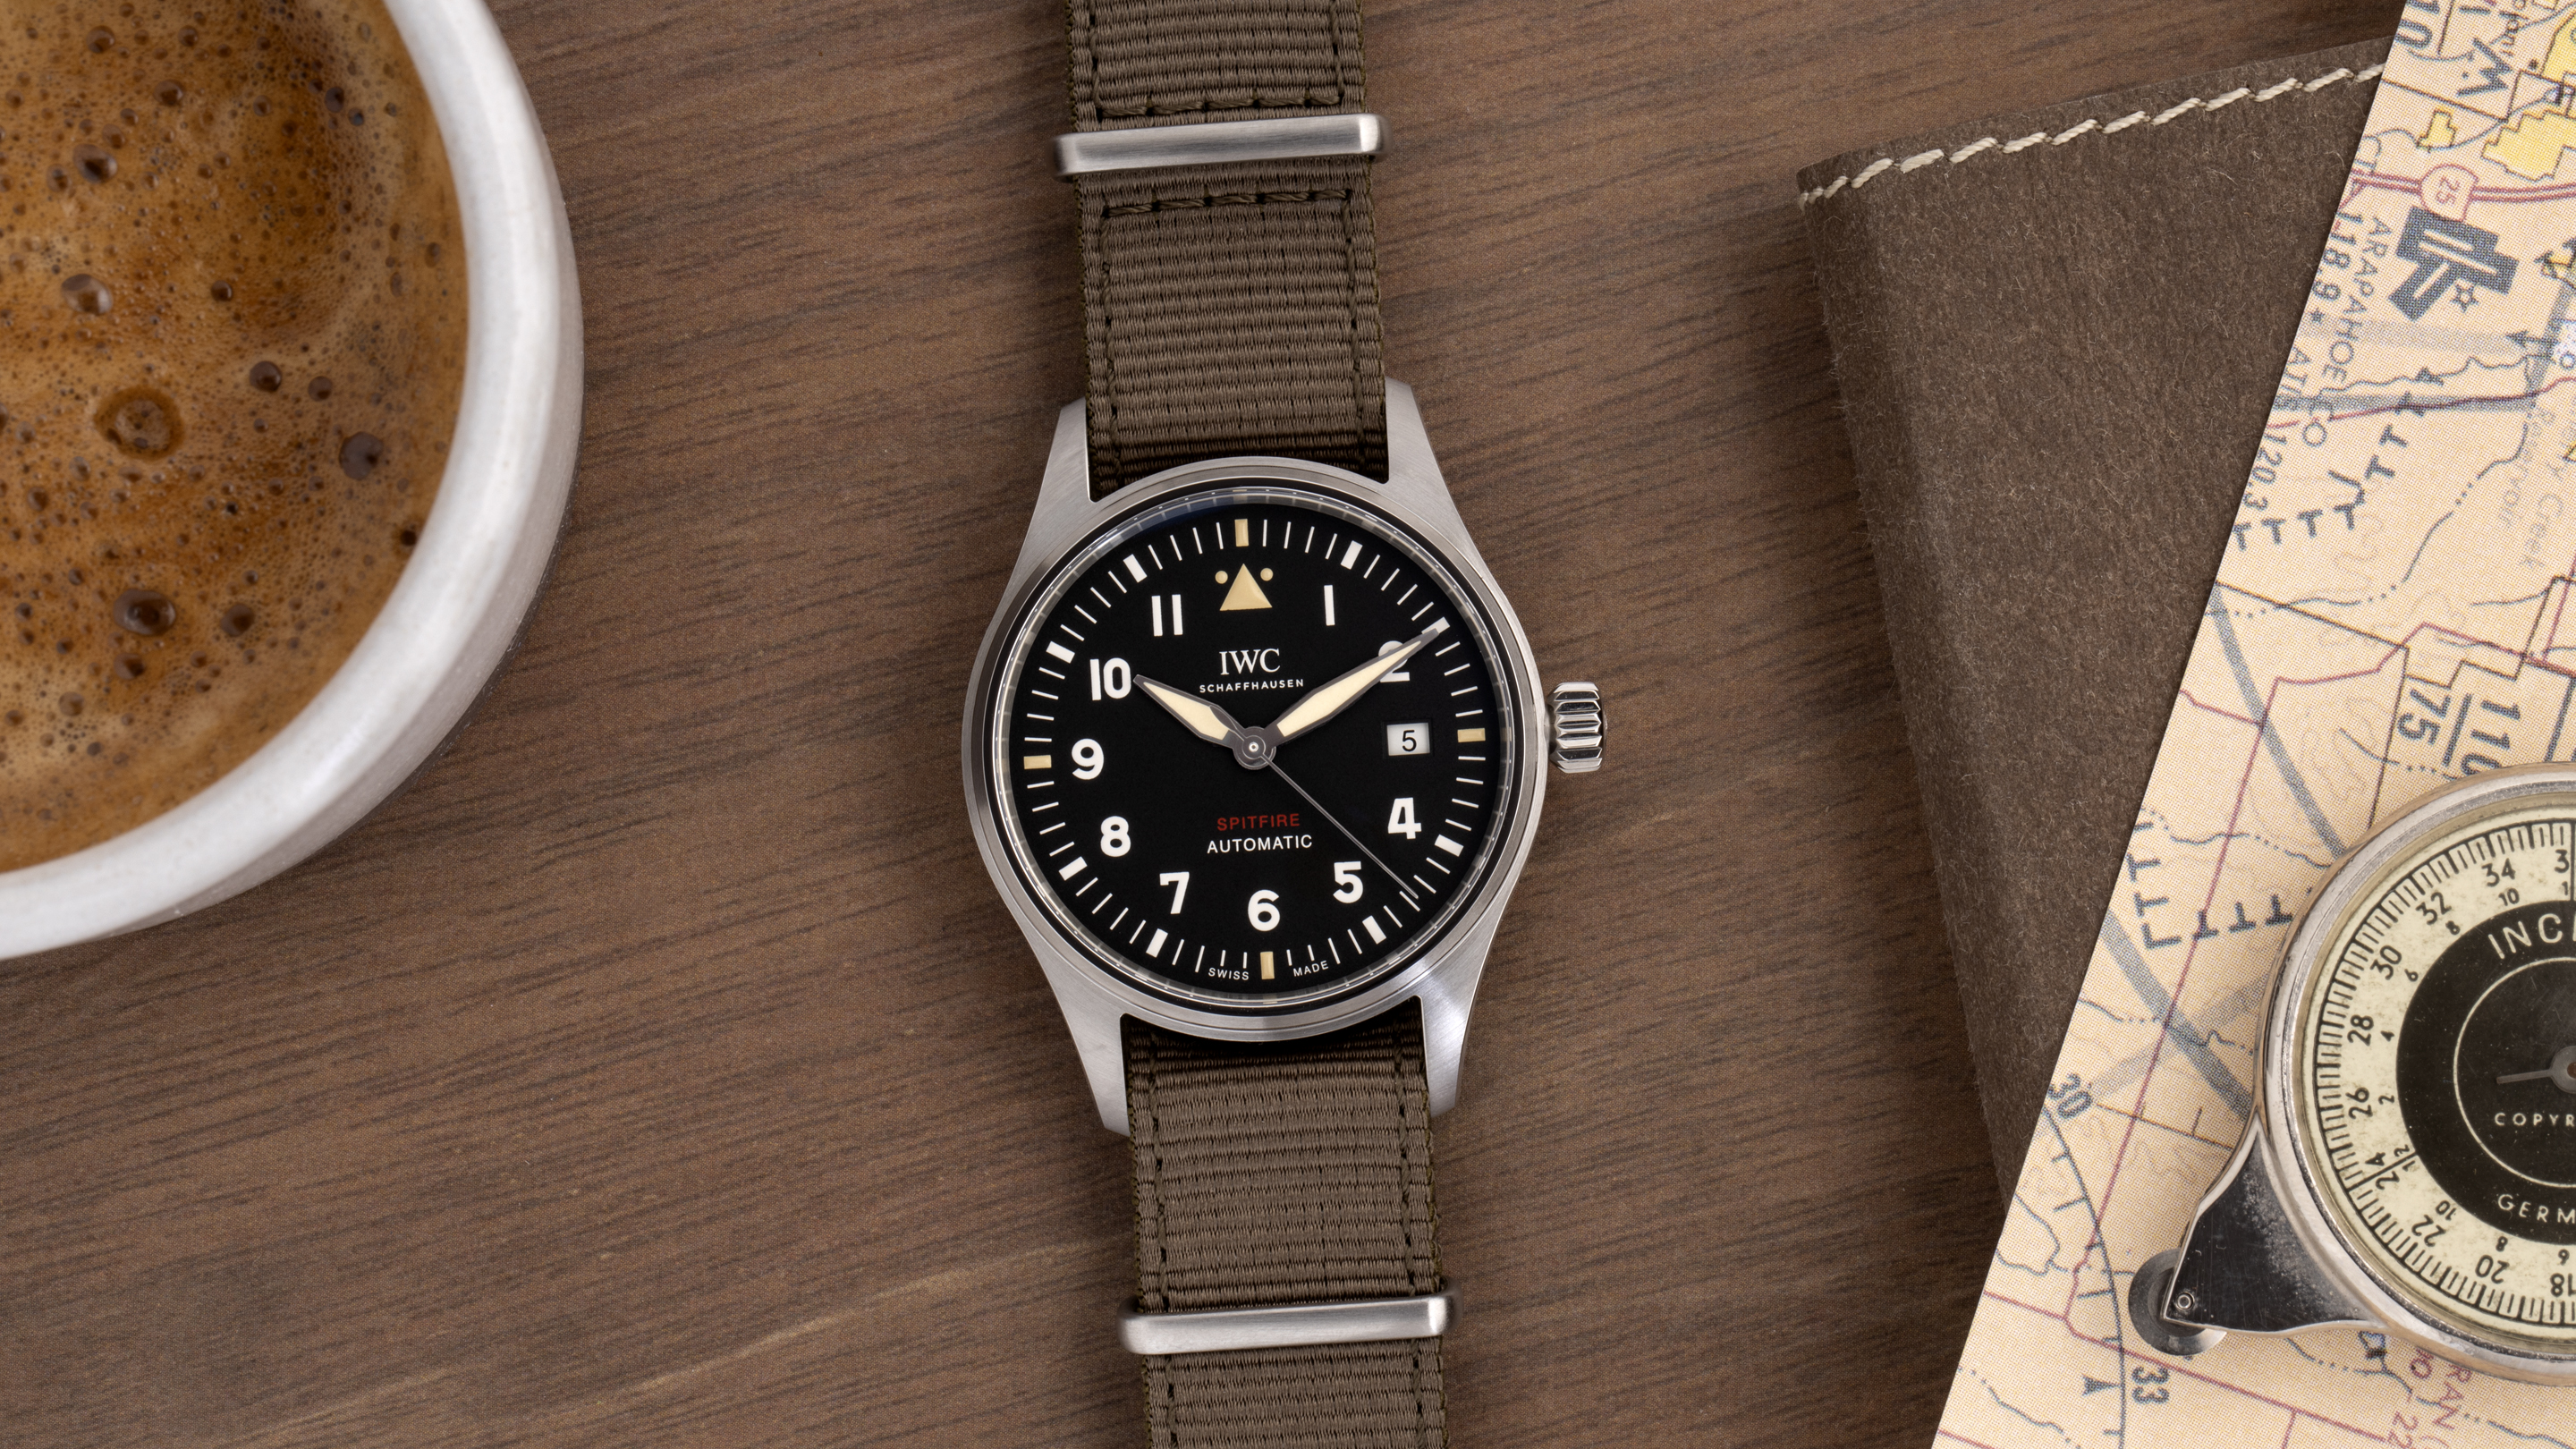 Introducing: The IWC Pilot's Watch Spitfire Collection - YouTube